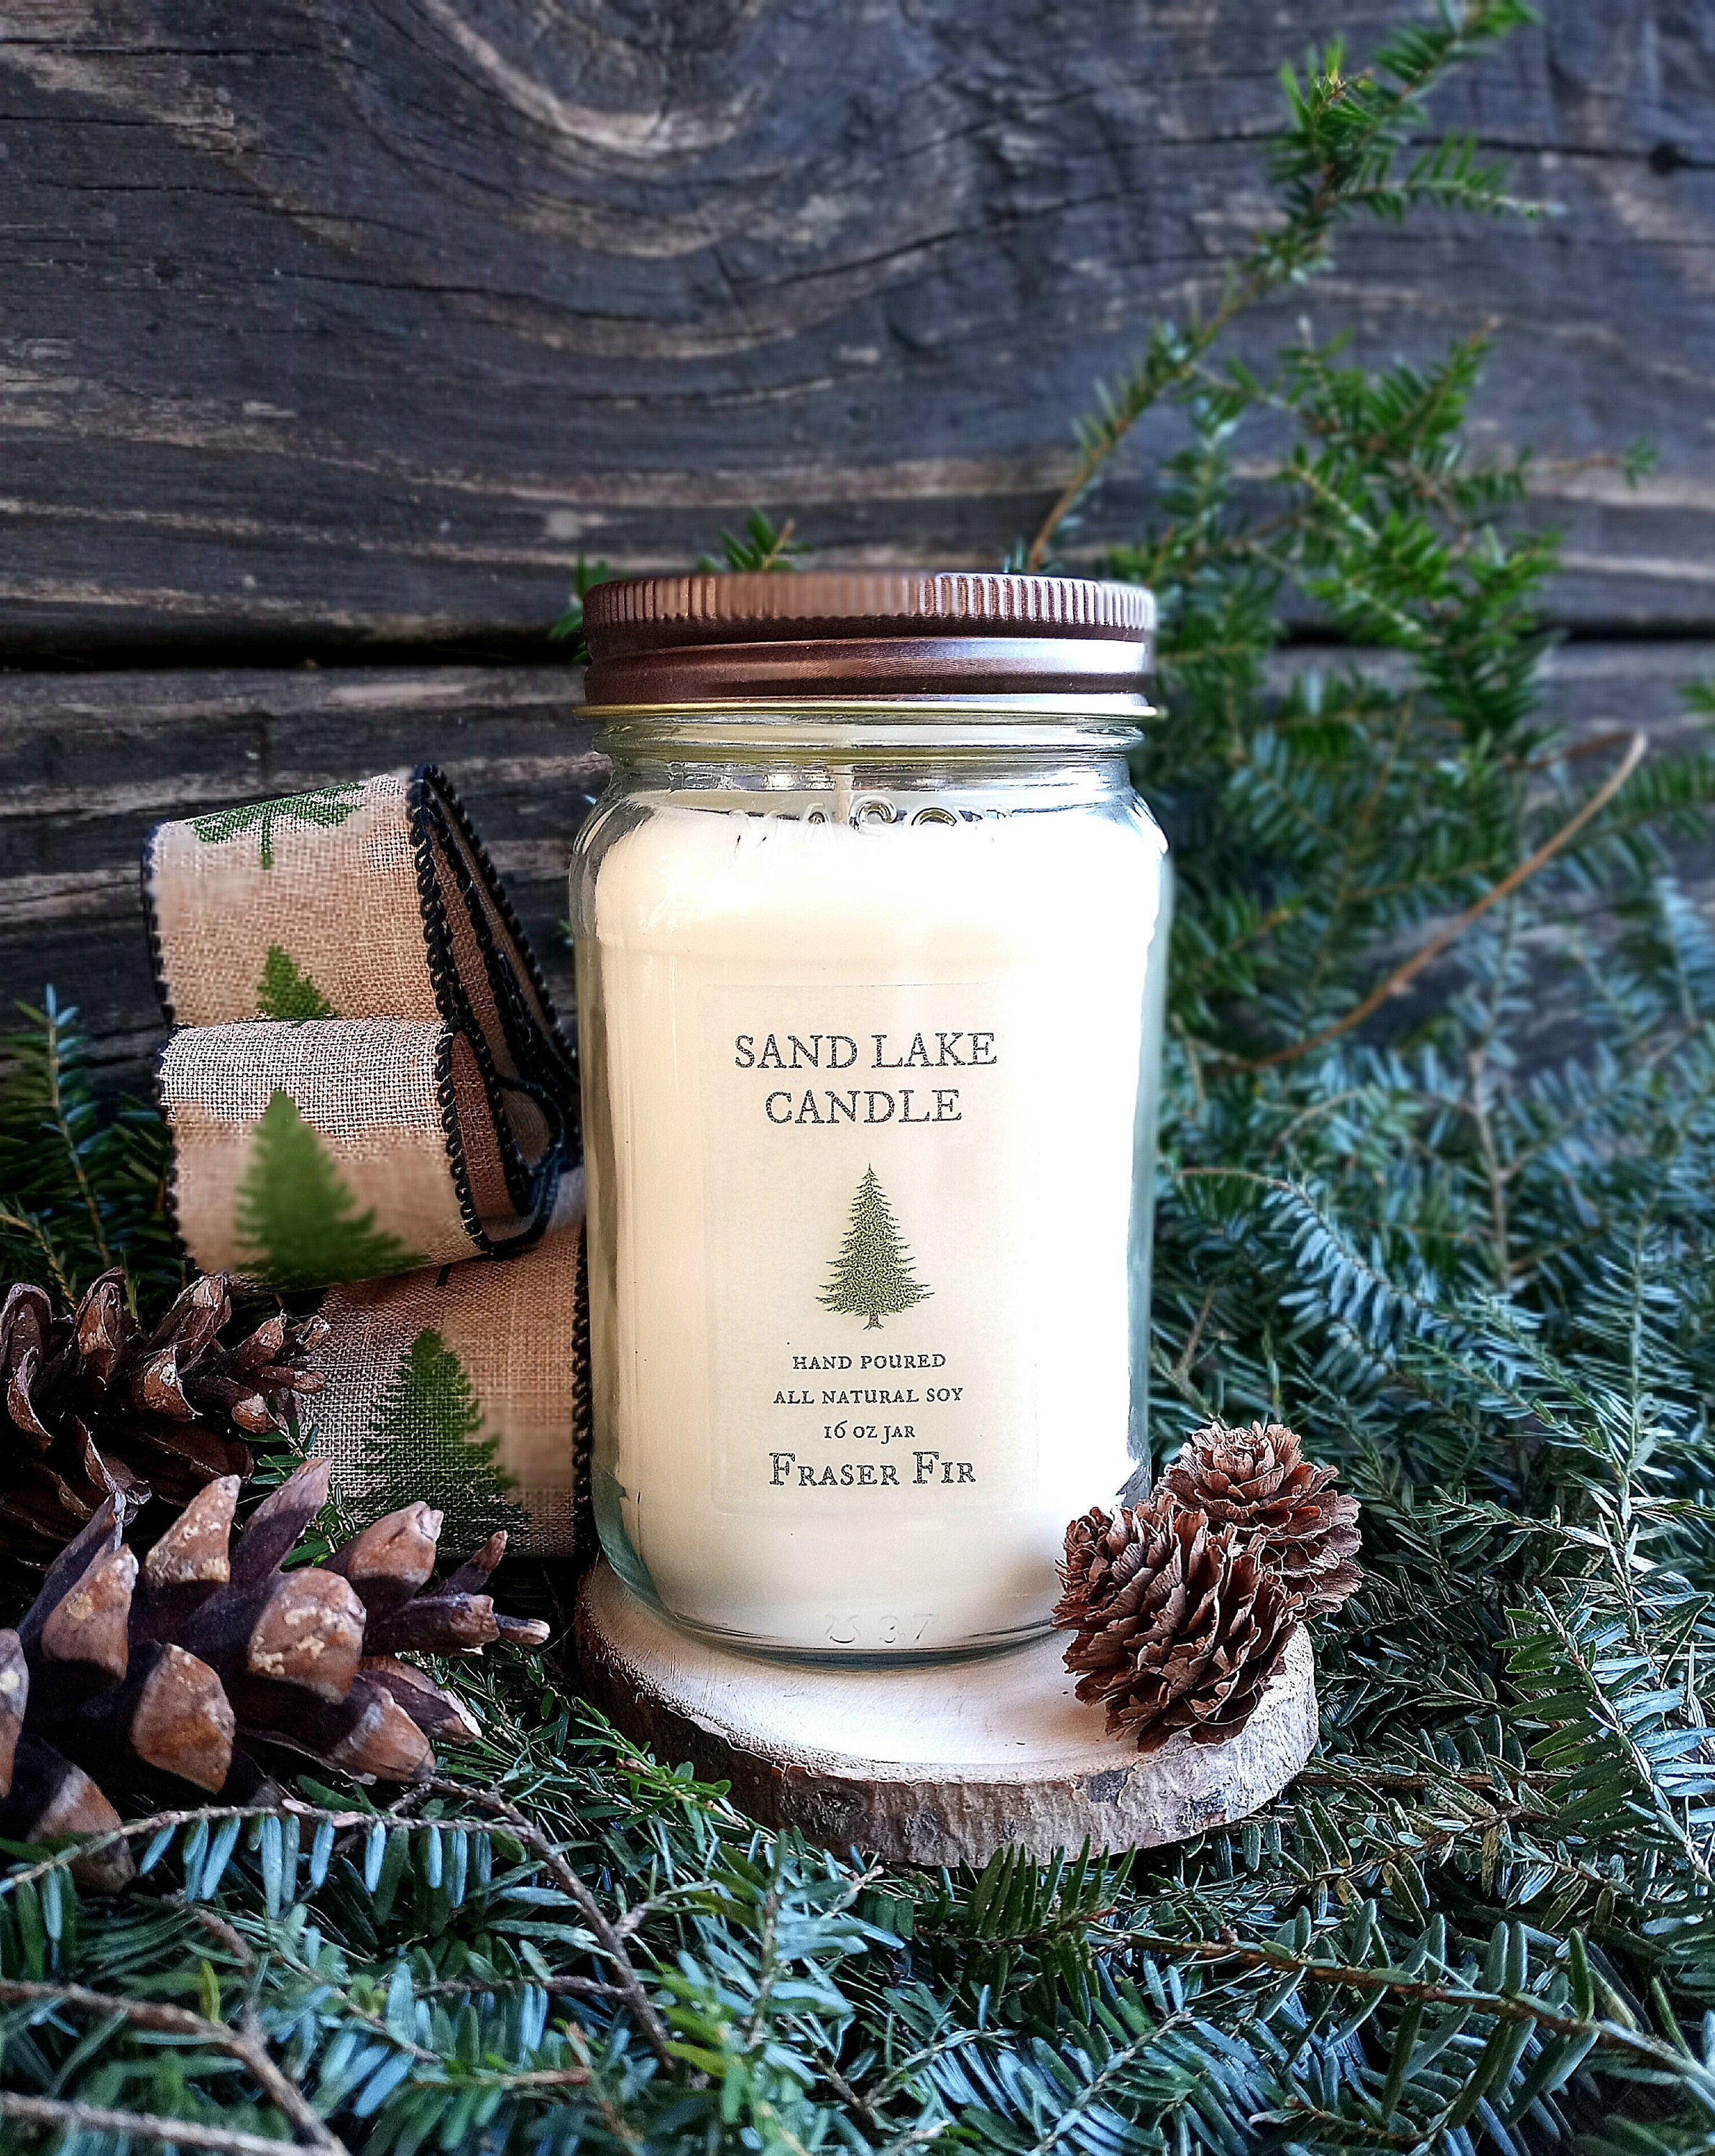 All Natural Soy Wickless Candle Jars - 7 oz